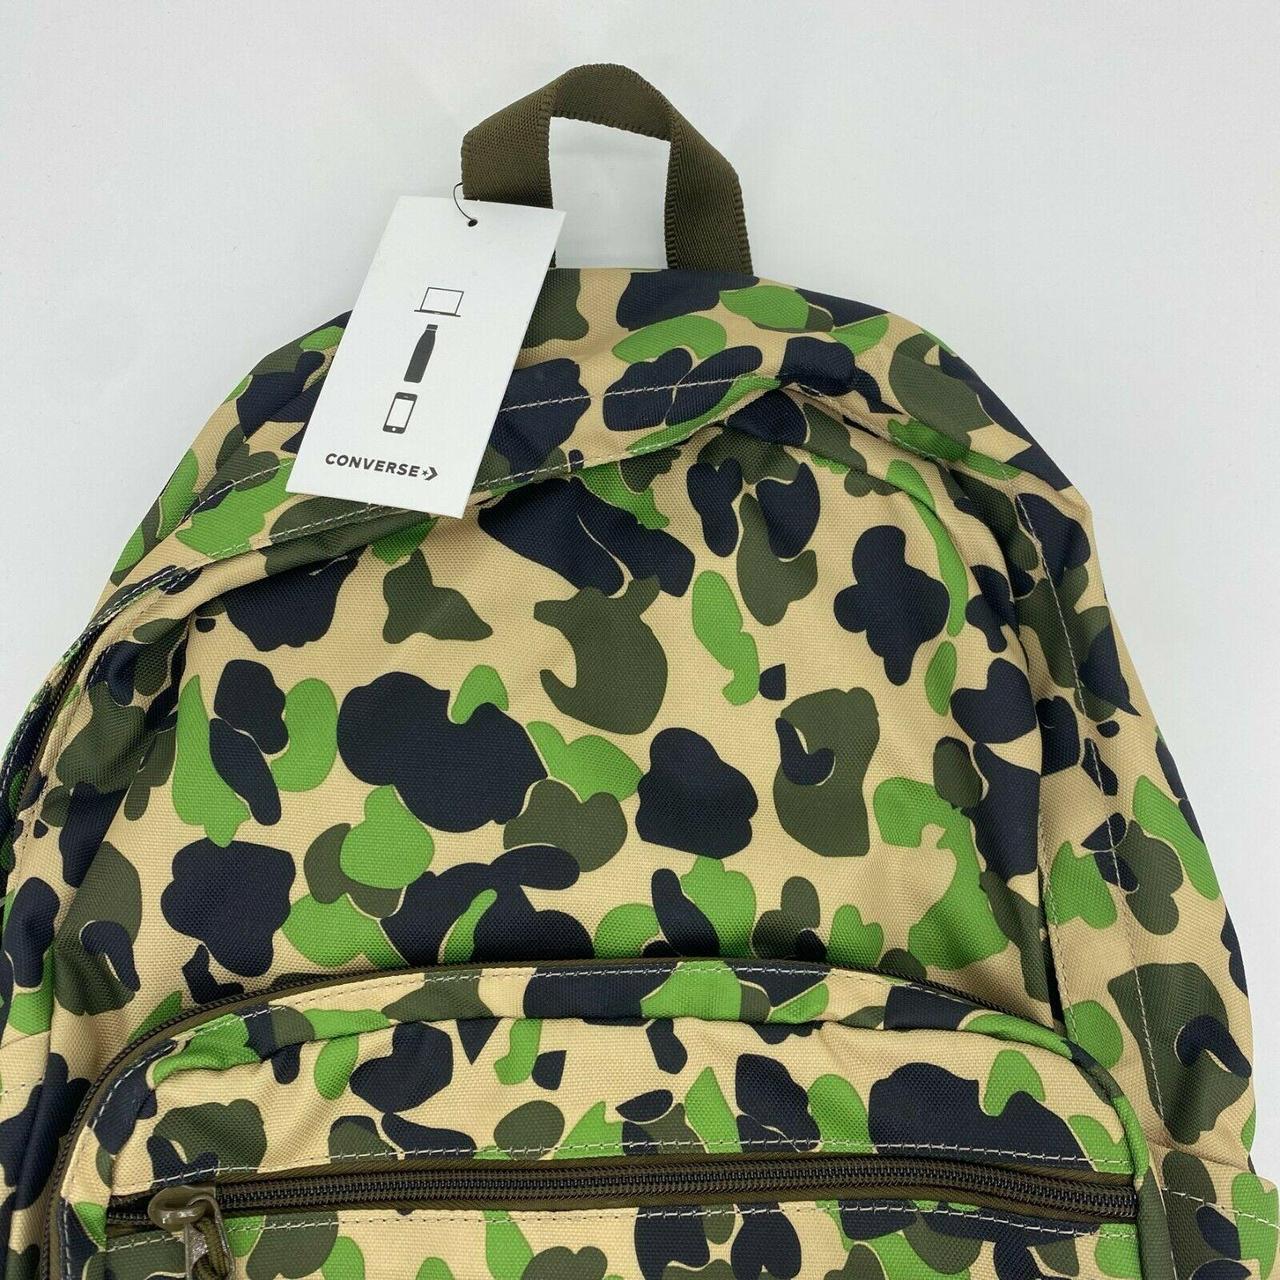 Converse GO 2 Camouflage Backpack School Bag